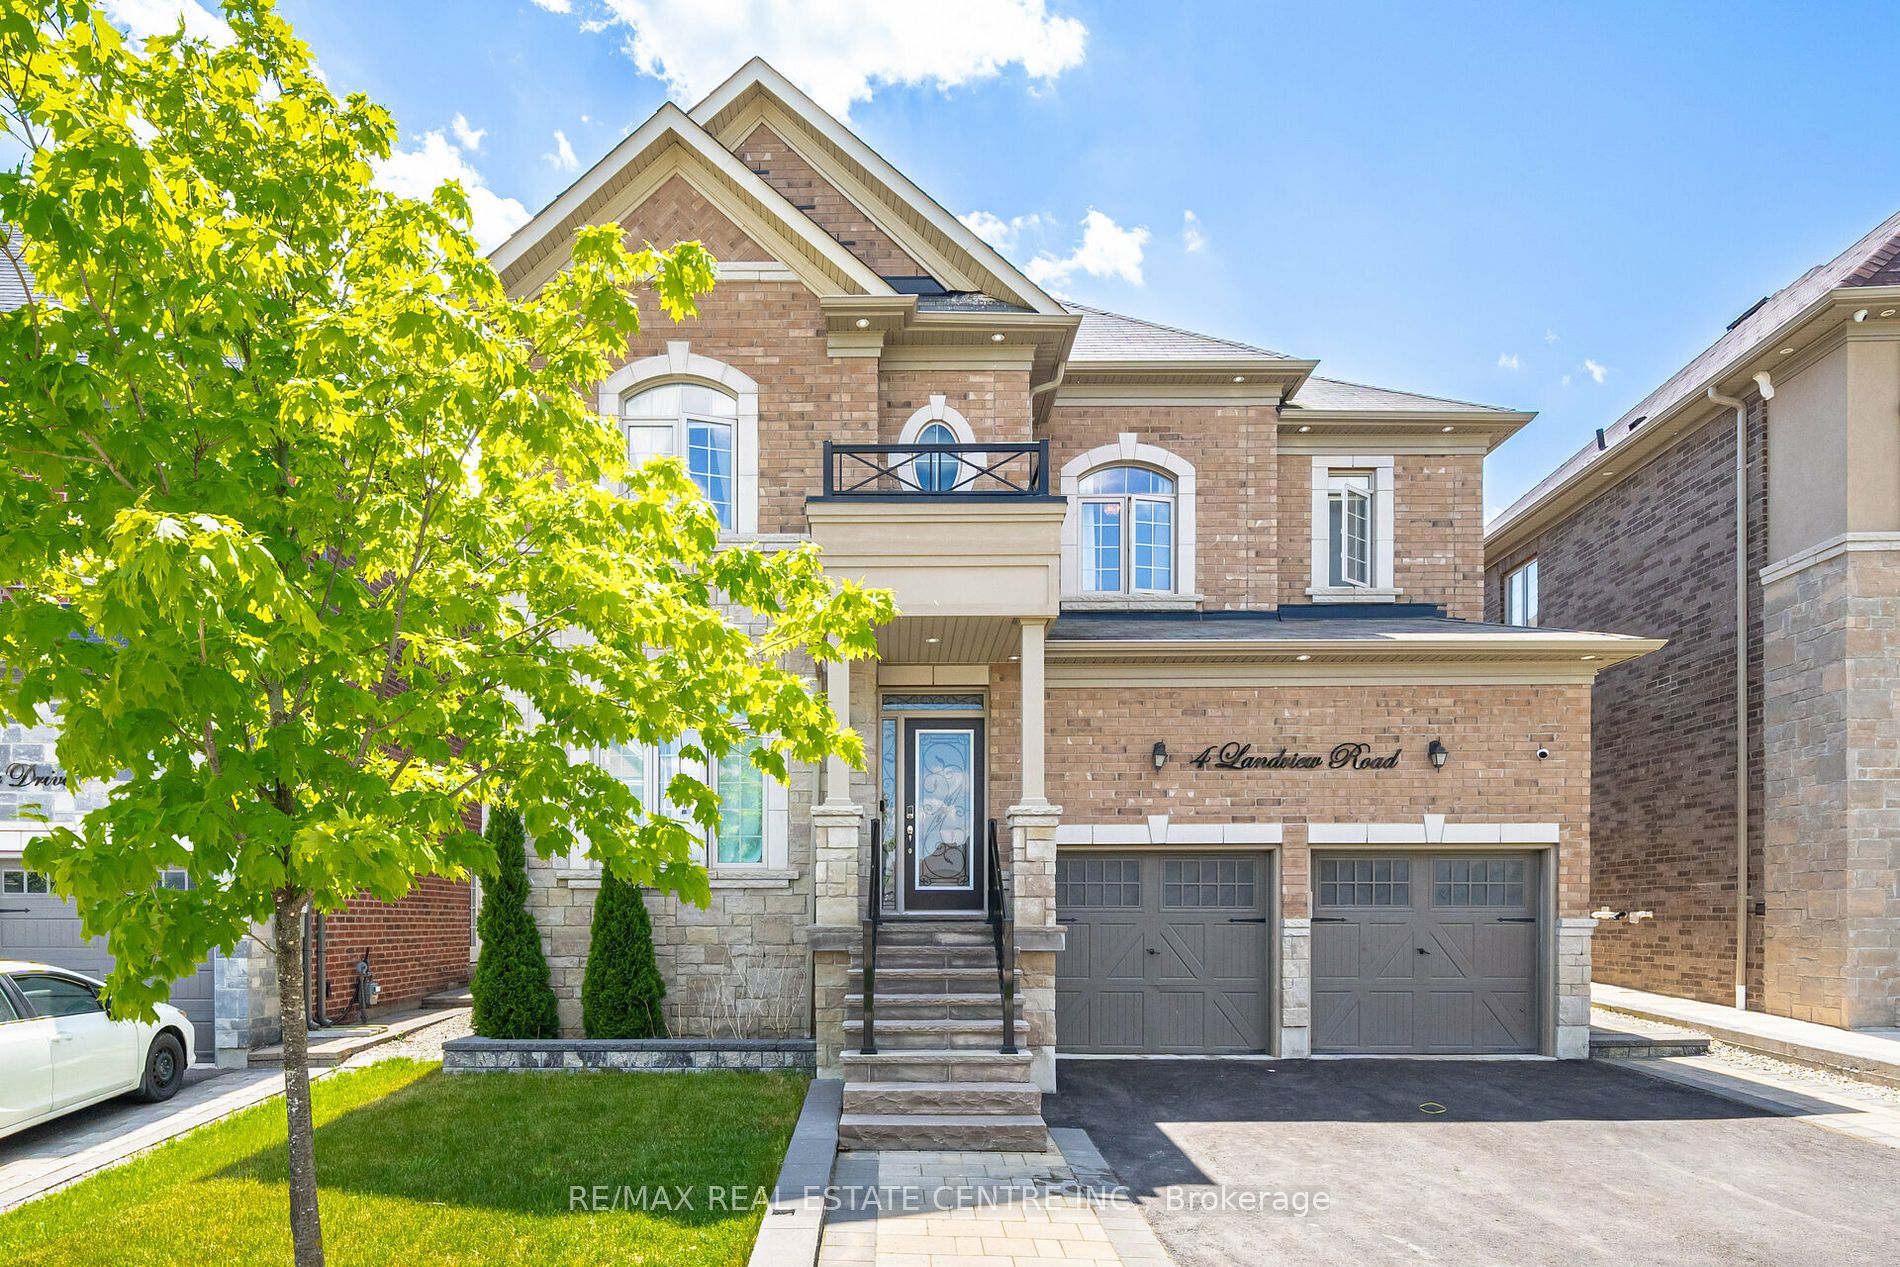 Detached house for sale at 4 Landview Rd Brampton Ontario